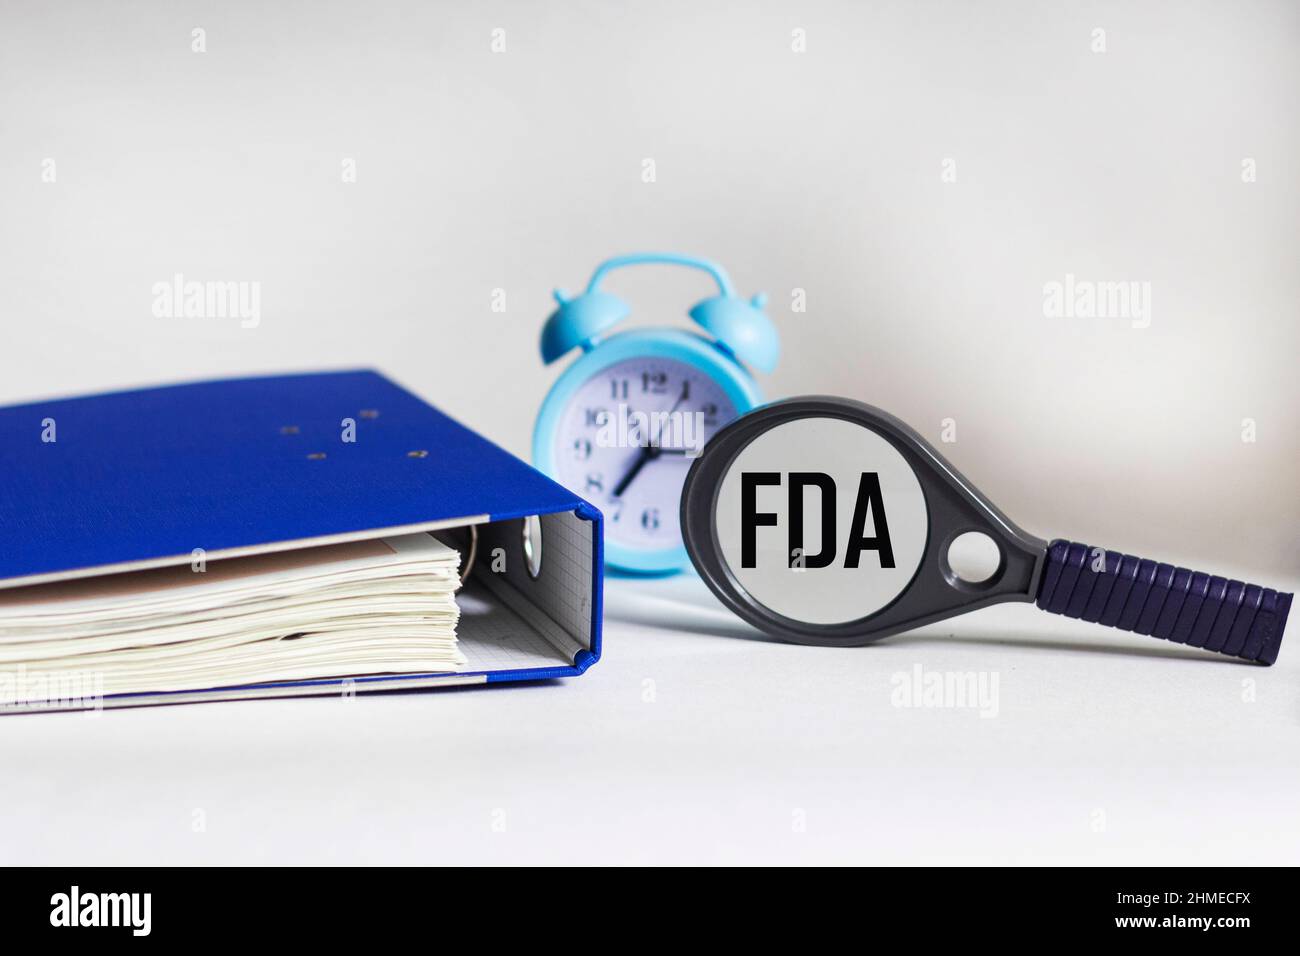 FDA concept. Concept of the Food and Drug Administration. Magnifier glass, folder and clock Stock Photo